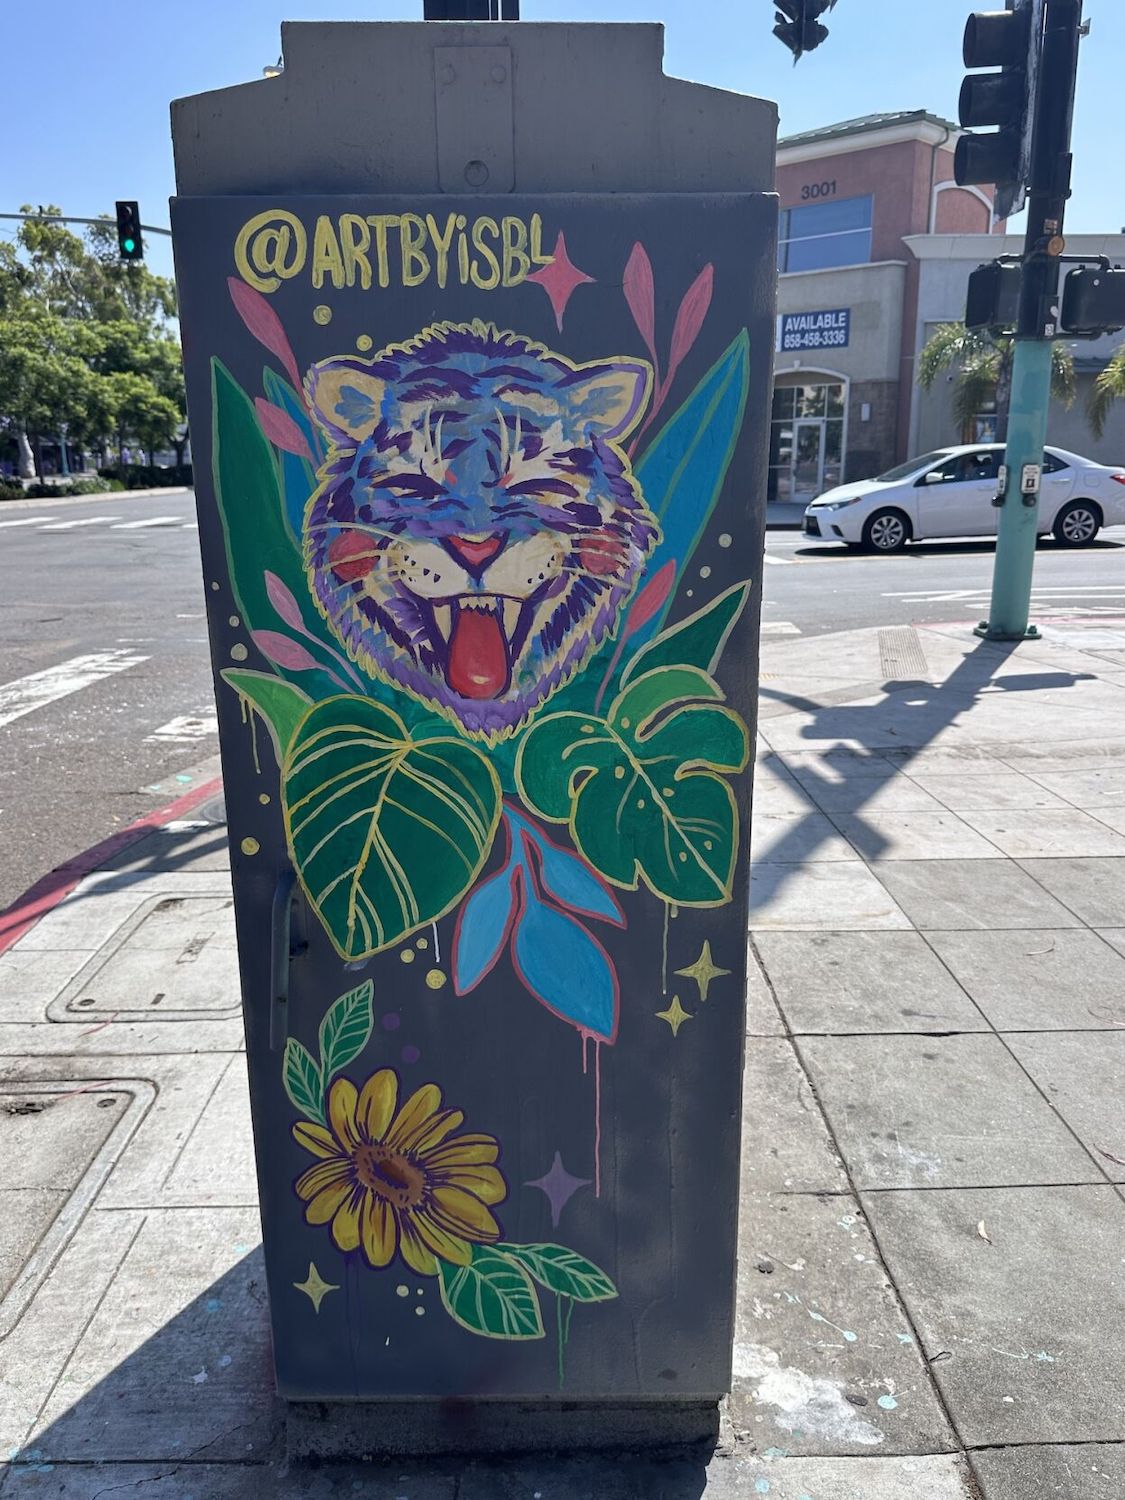 A San Diego utility box mural featuring illustrations of a wildcat and plants